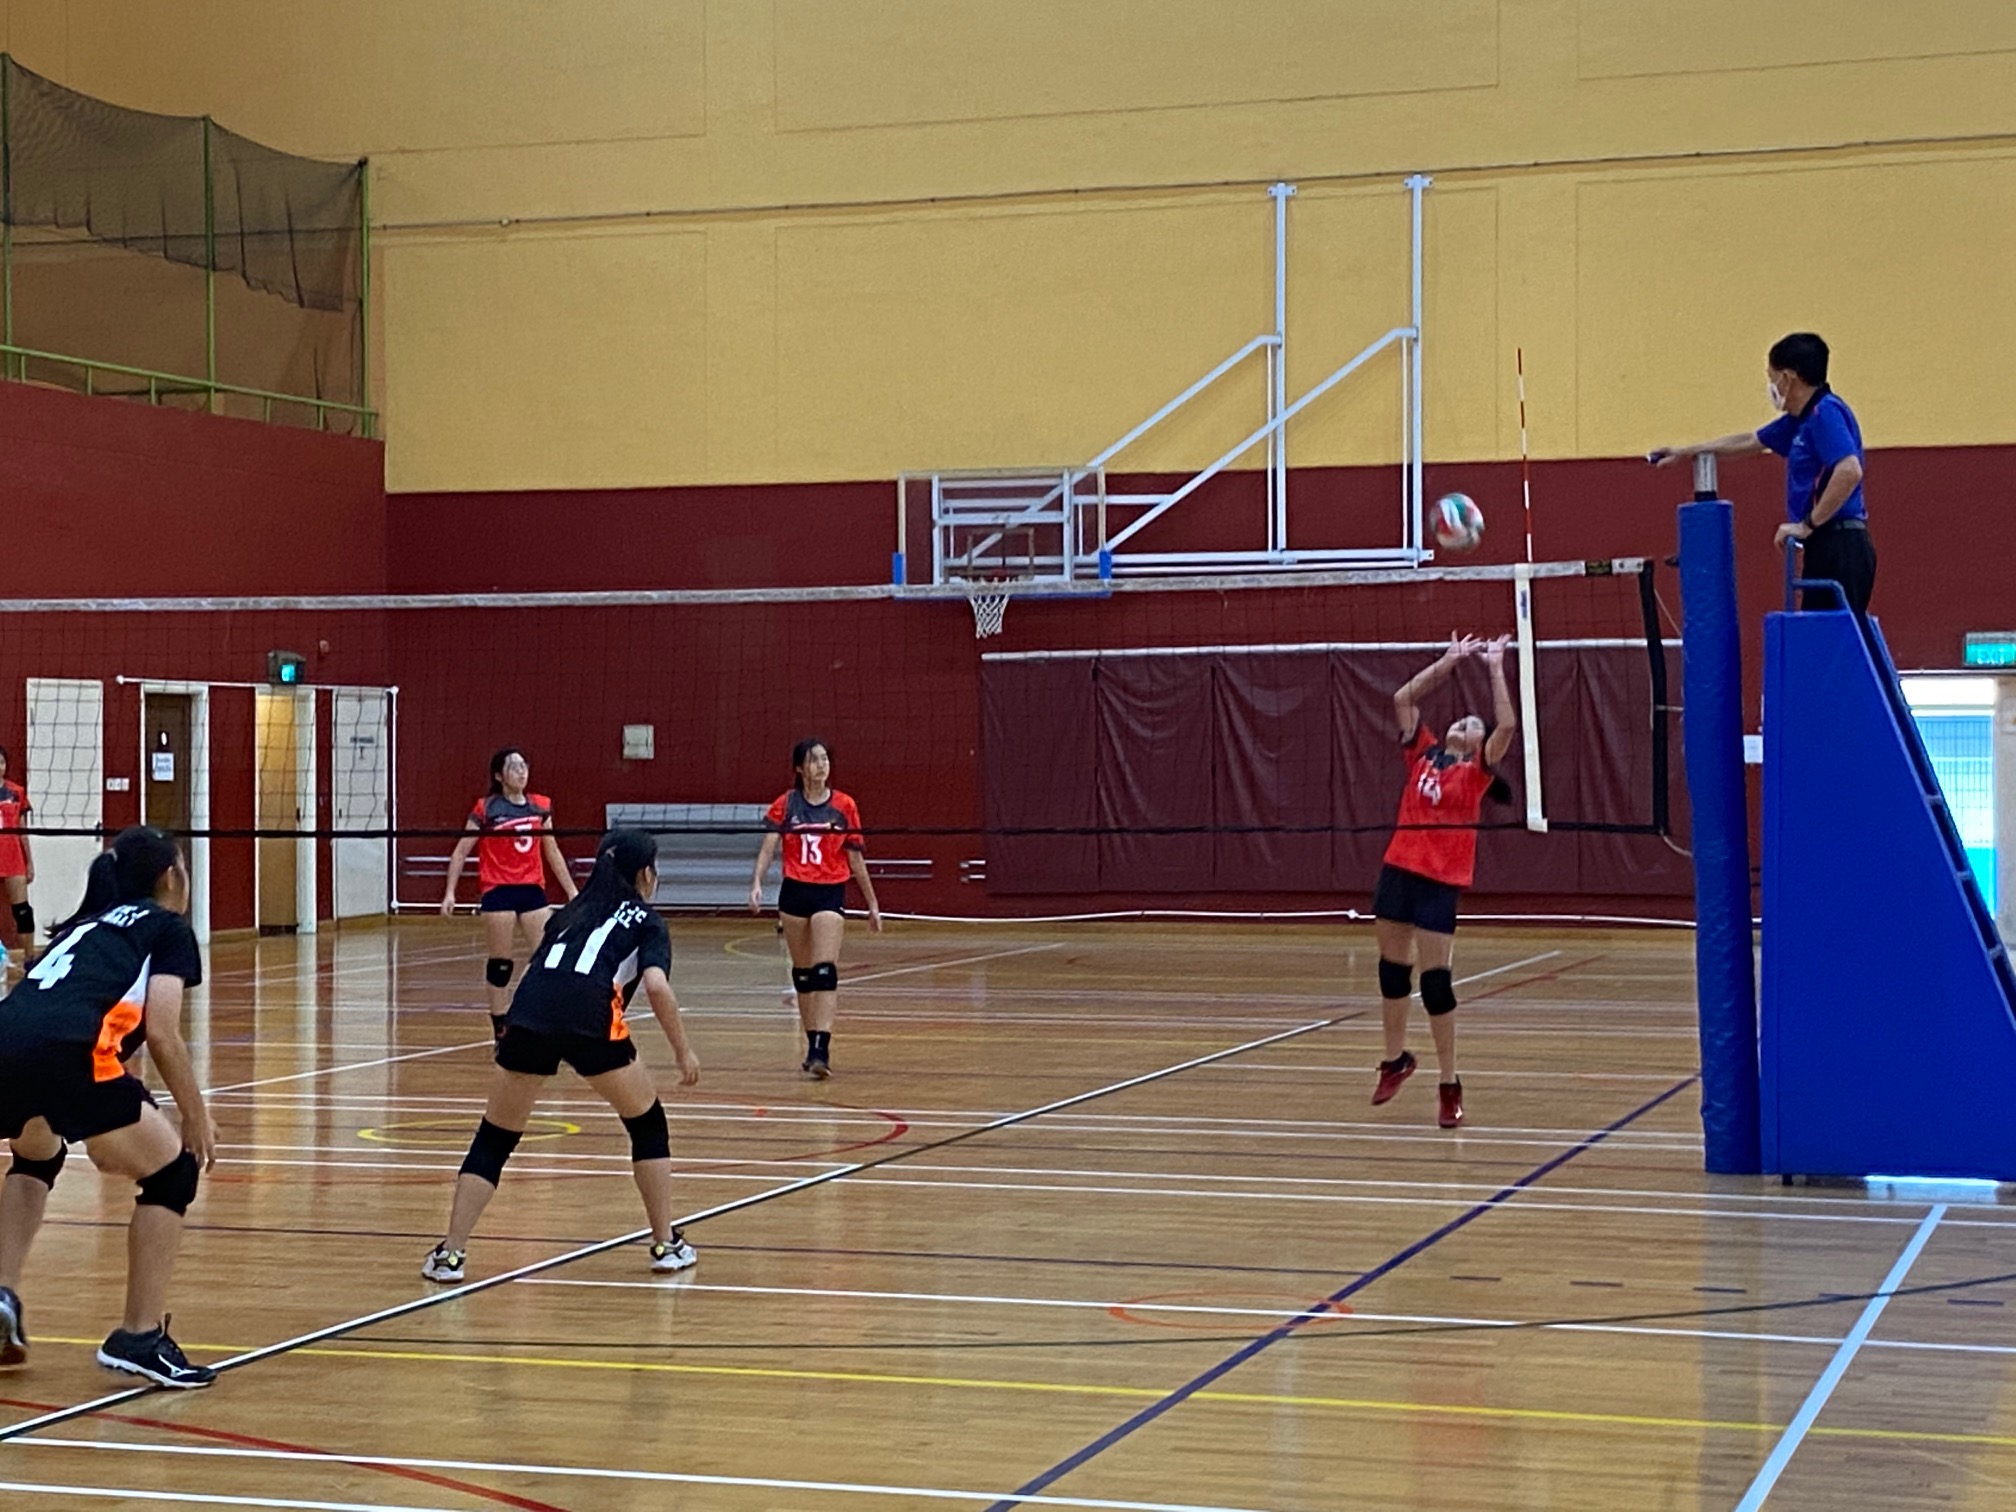 NSG Girls' Volleyball : ACJC makes it 3 wins out of 3, to set up showdown with defending champions, NYJC!